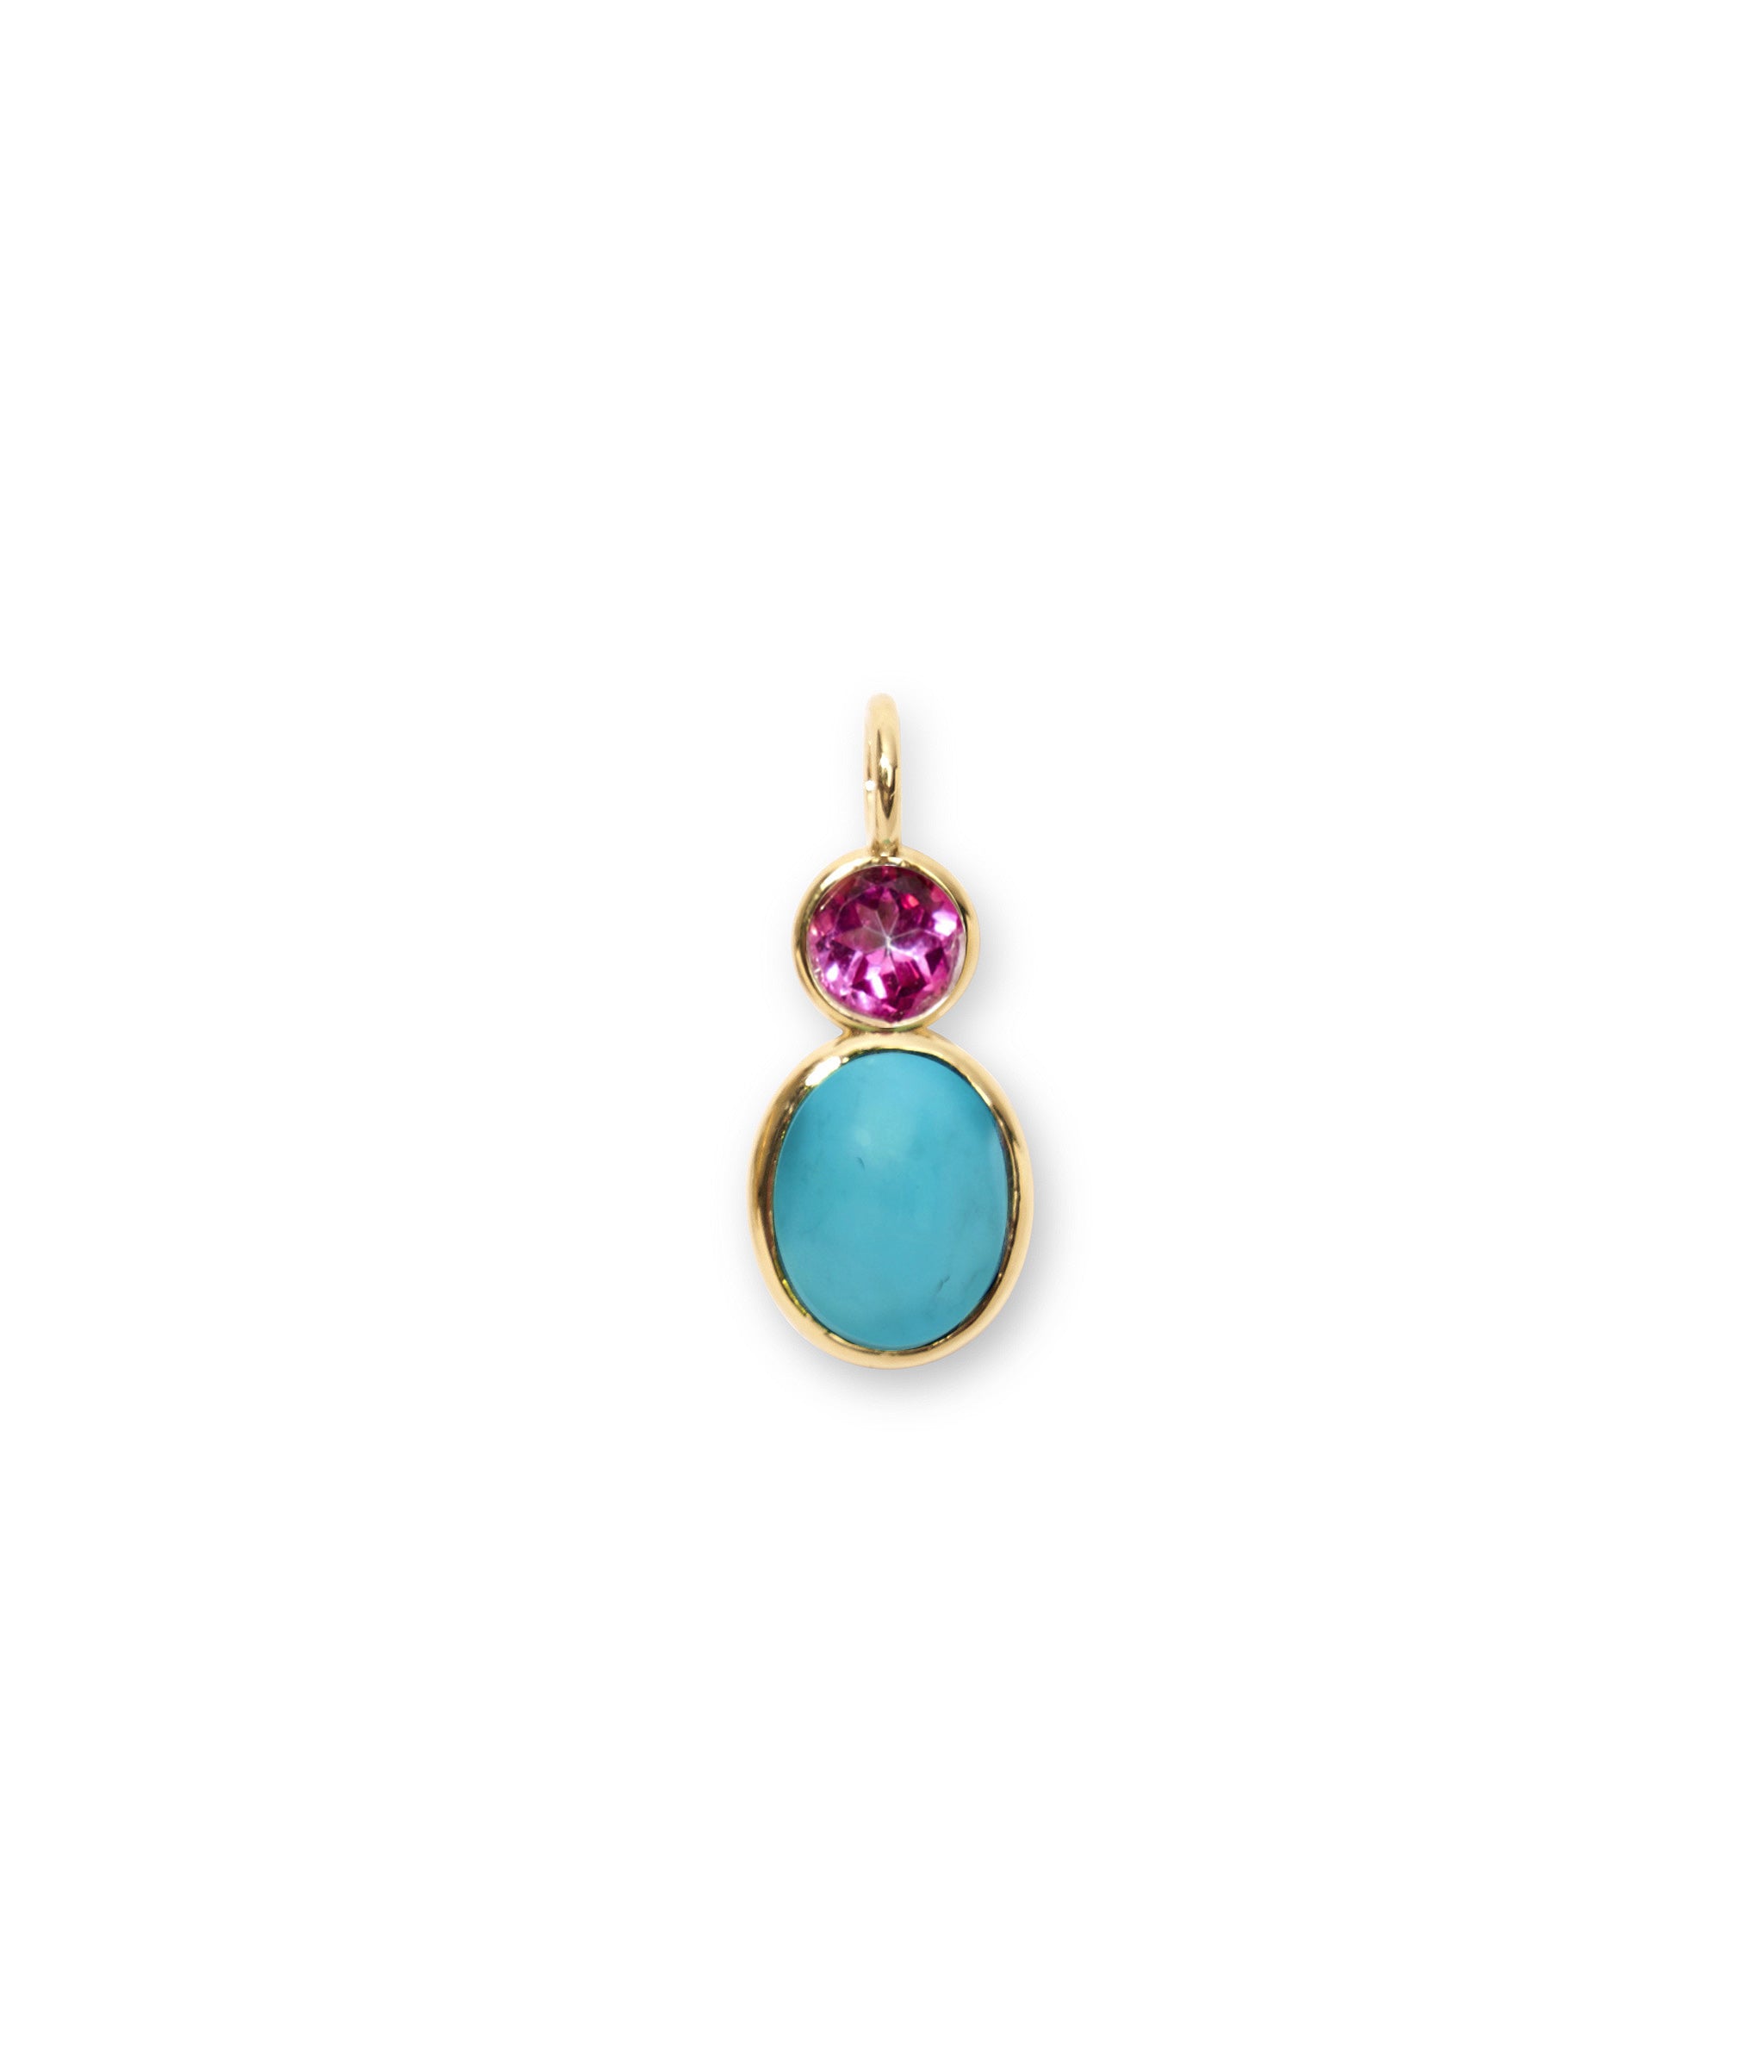 Pink Topaz & Turquoise 14k Gold Necklace Charm. Faceted pink topaz and turquoise oval cabochon with gold bezels